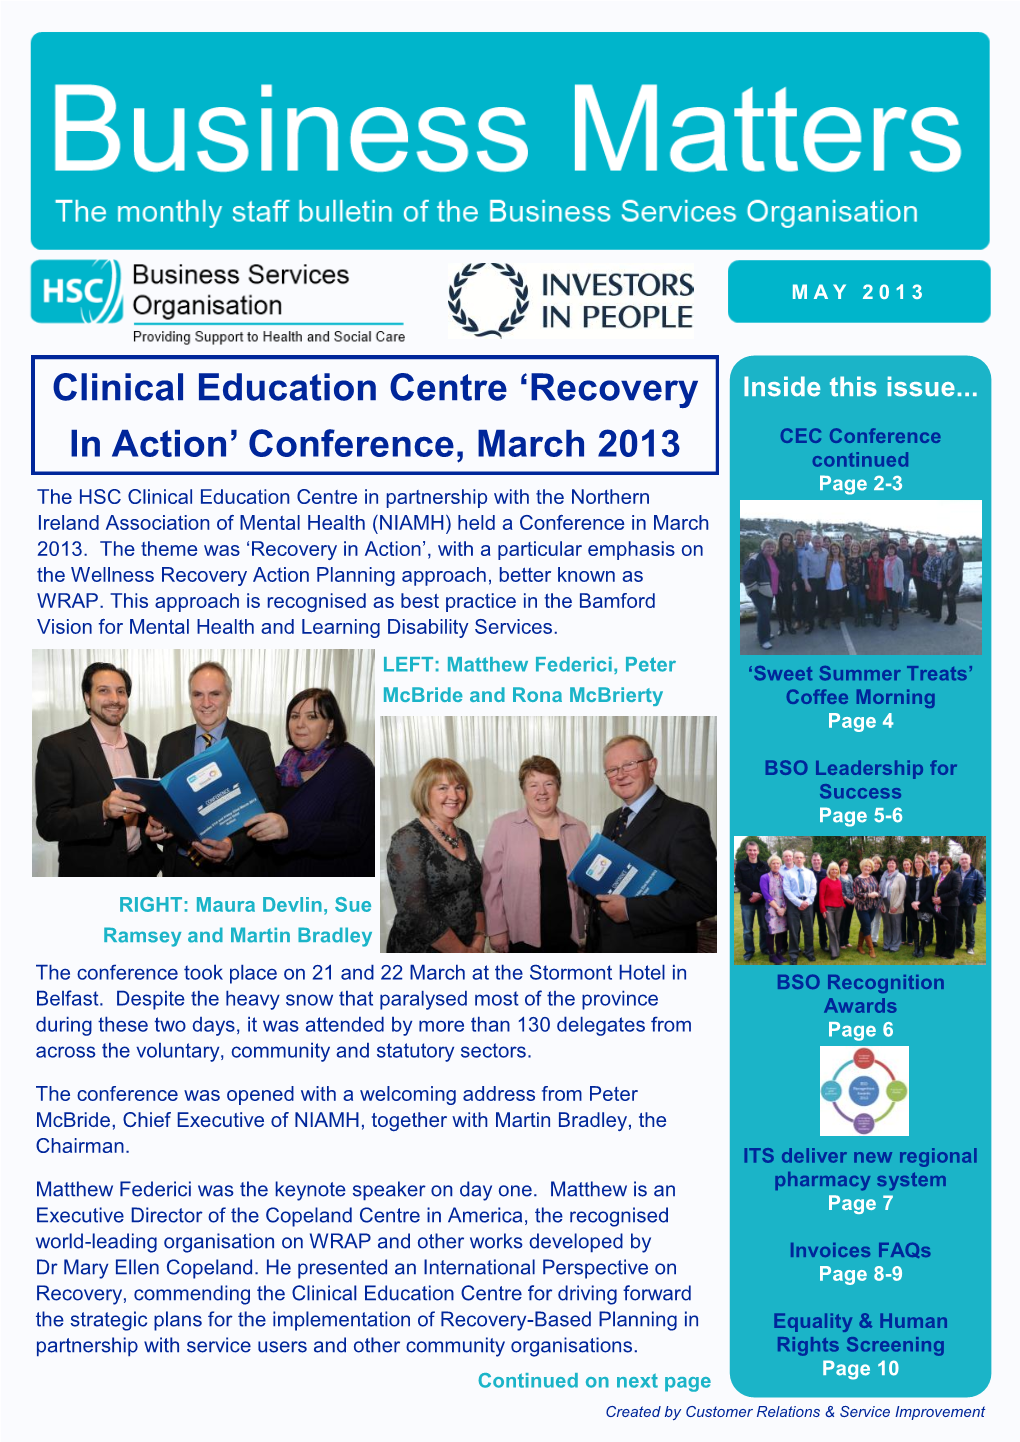 Clinical Education Centre 'Recovery in Action' Conference, March 2013